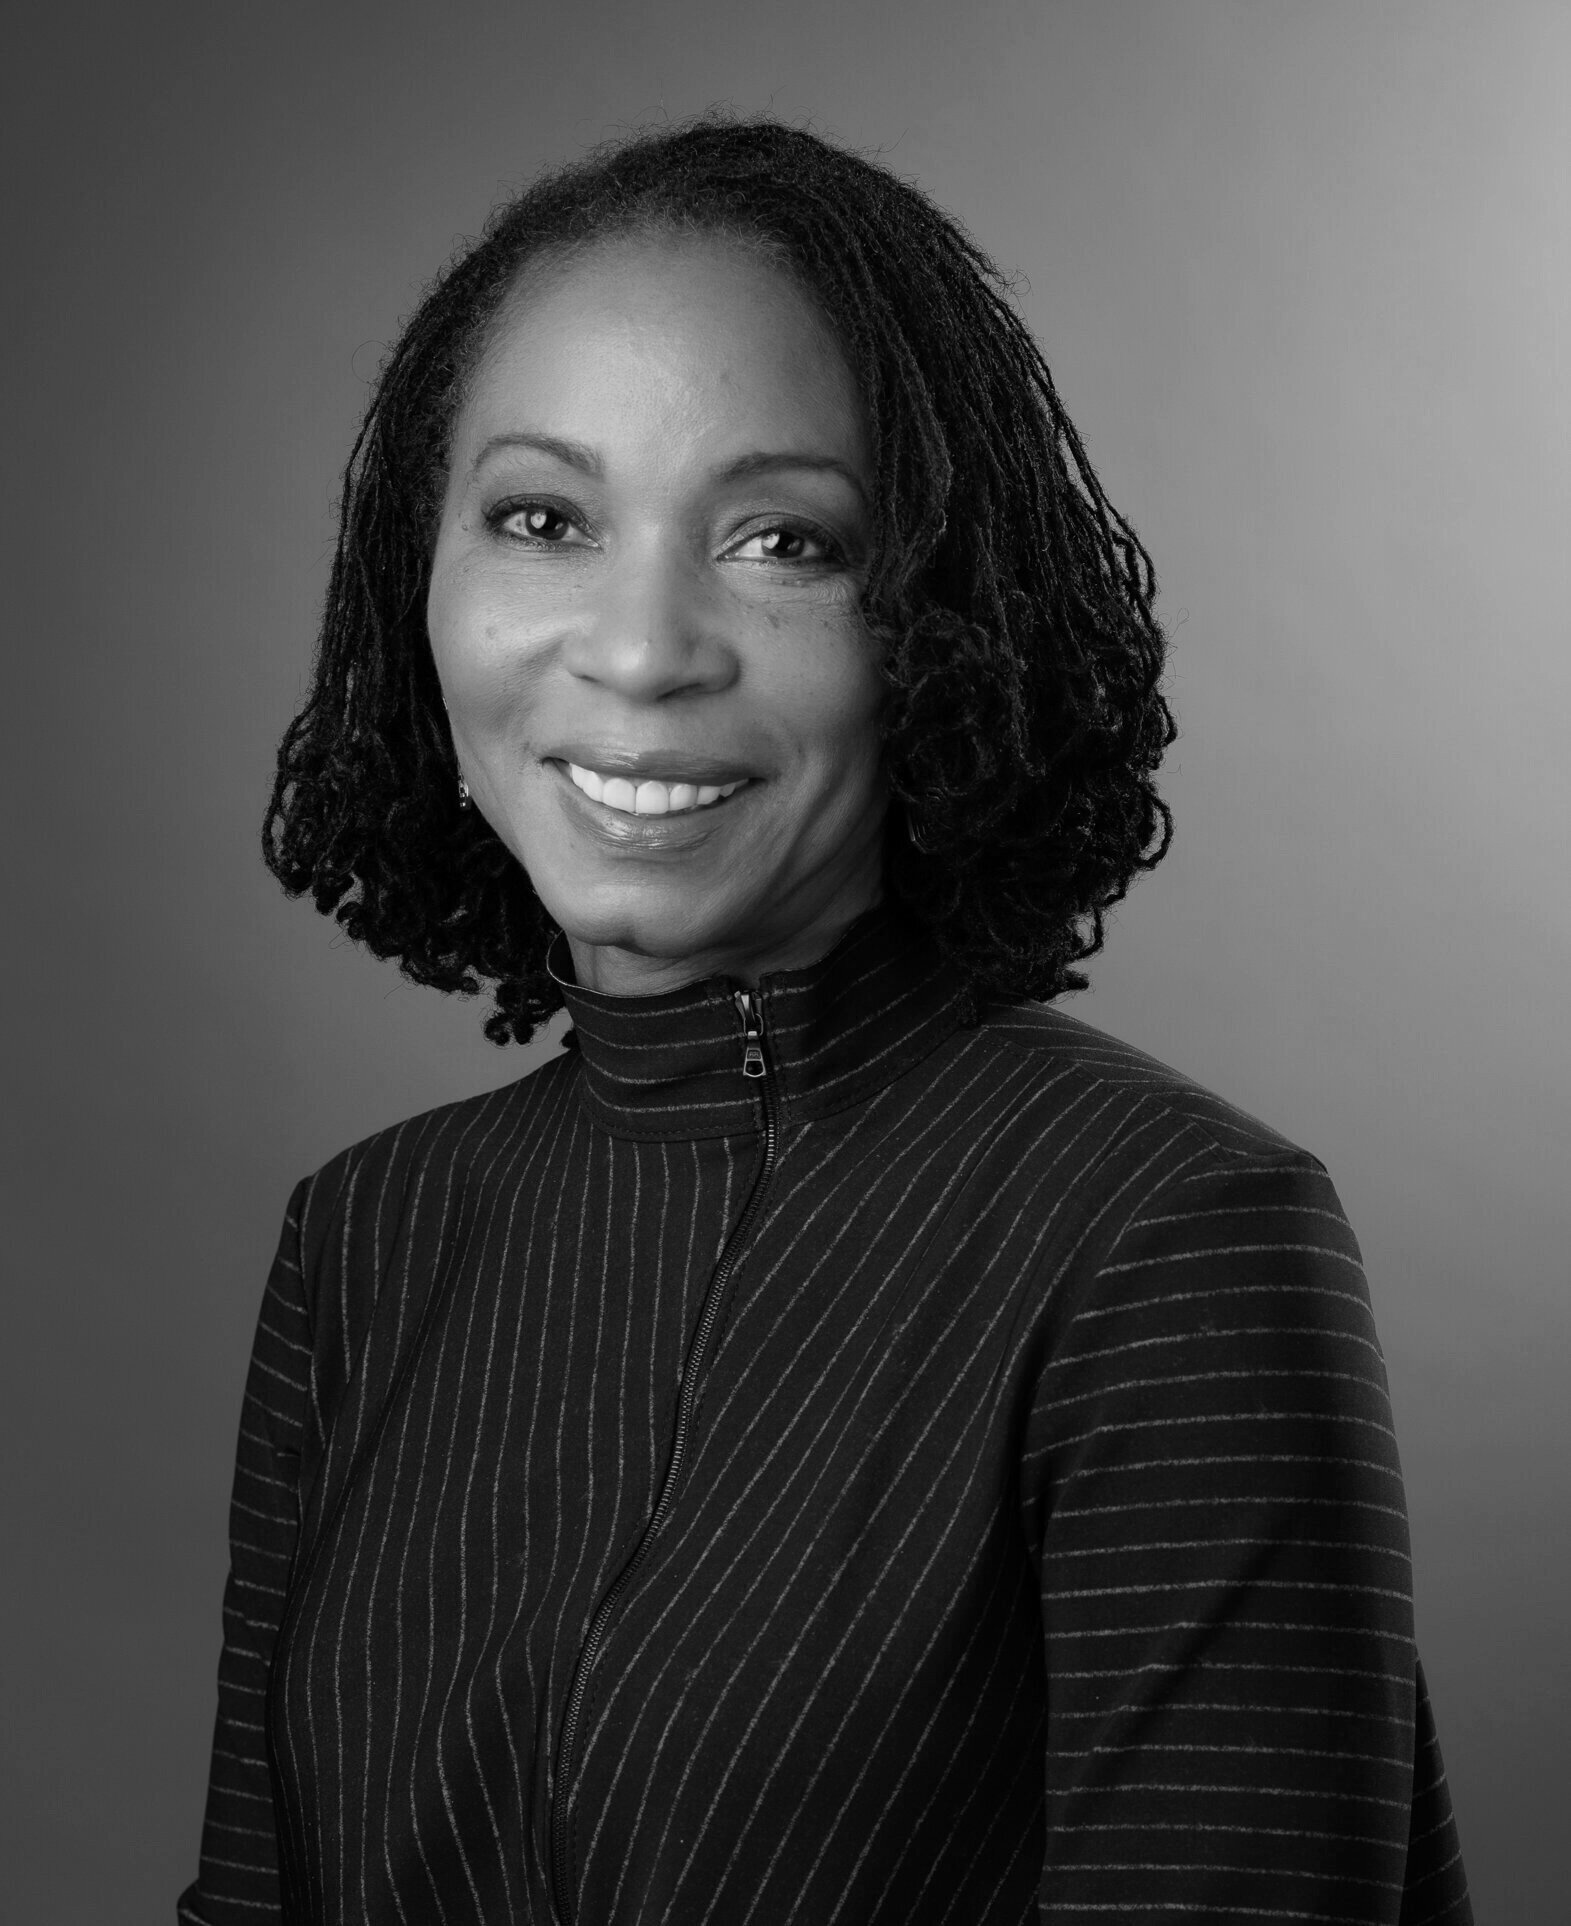 &lt;h3&gt;Dr. Helene D. Gayle&lt;/h3&gt;&lt;h5&gt;President and Chief Executive Officer&lt;/h5&gt;&lt;i&gt;The Chicago Community Trust&lt;/i&gt;